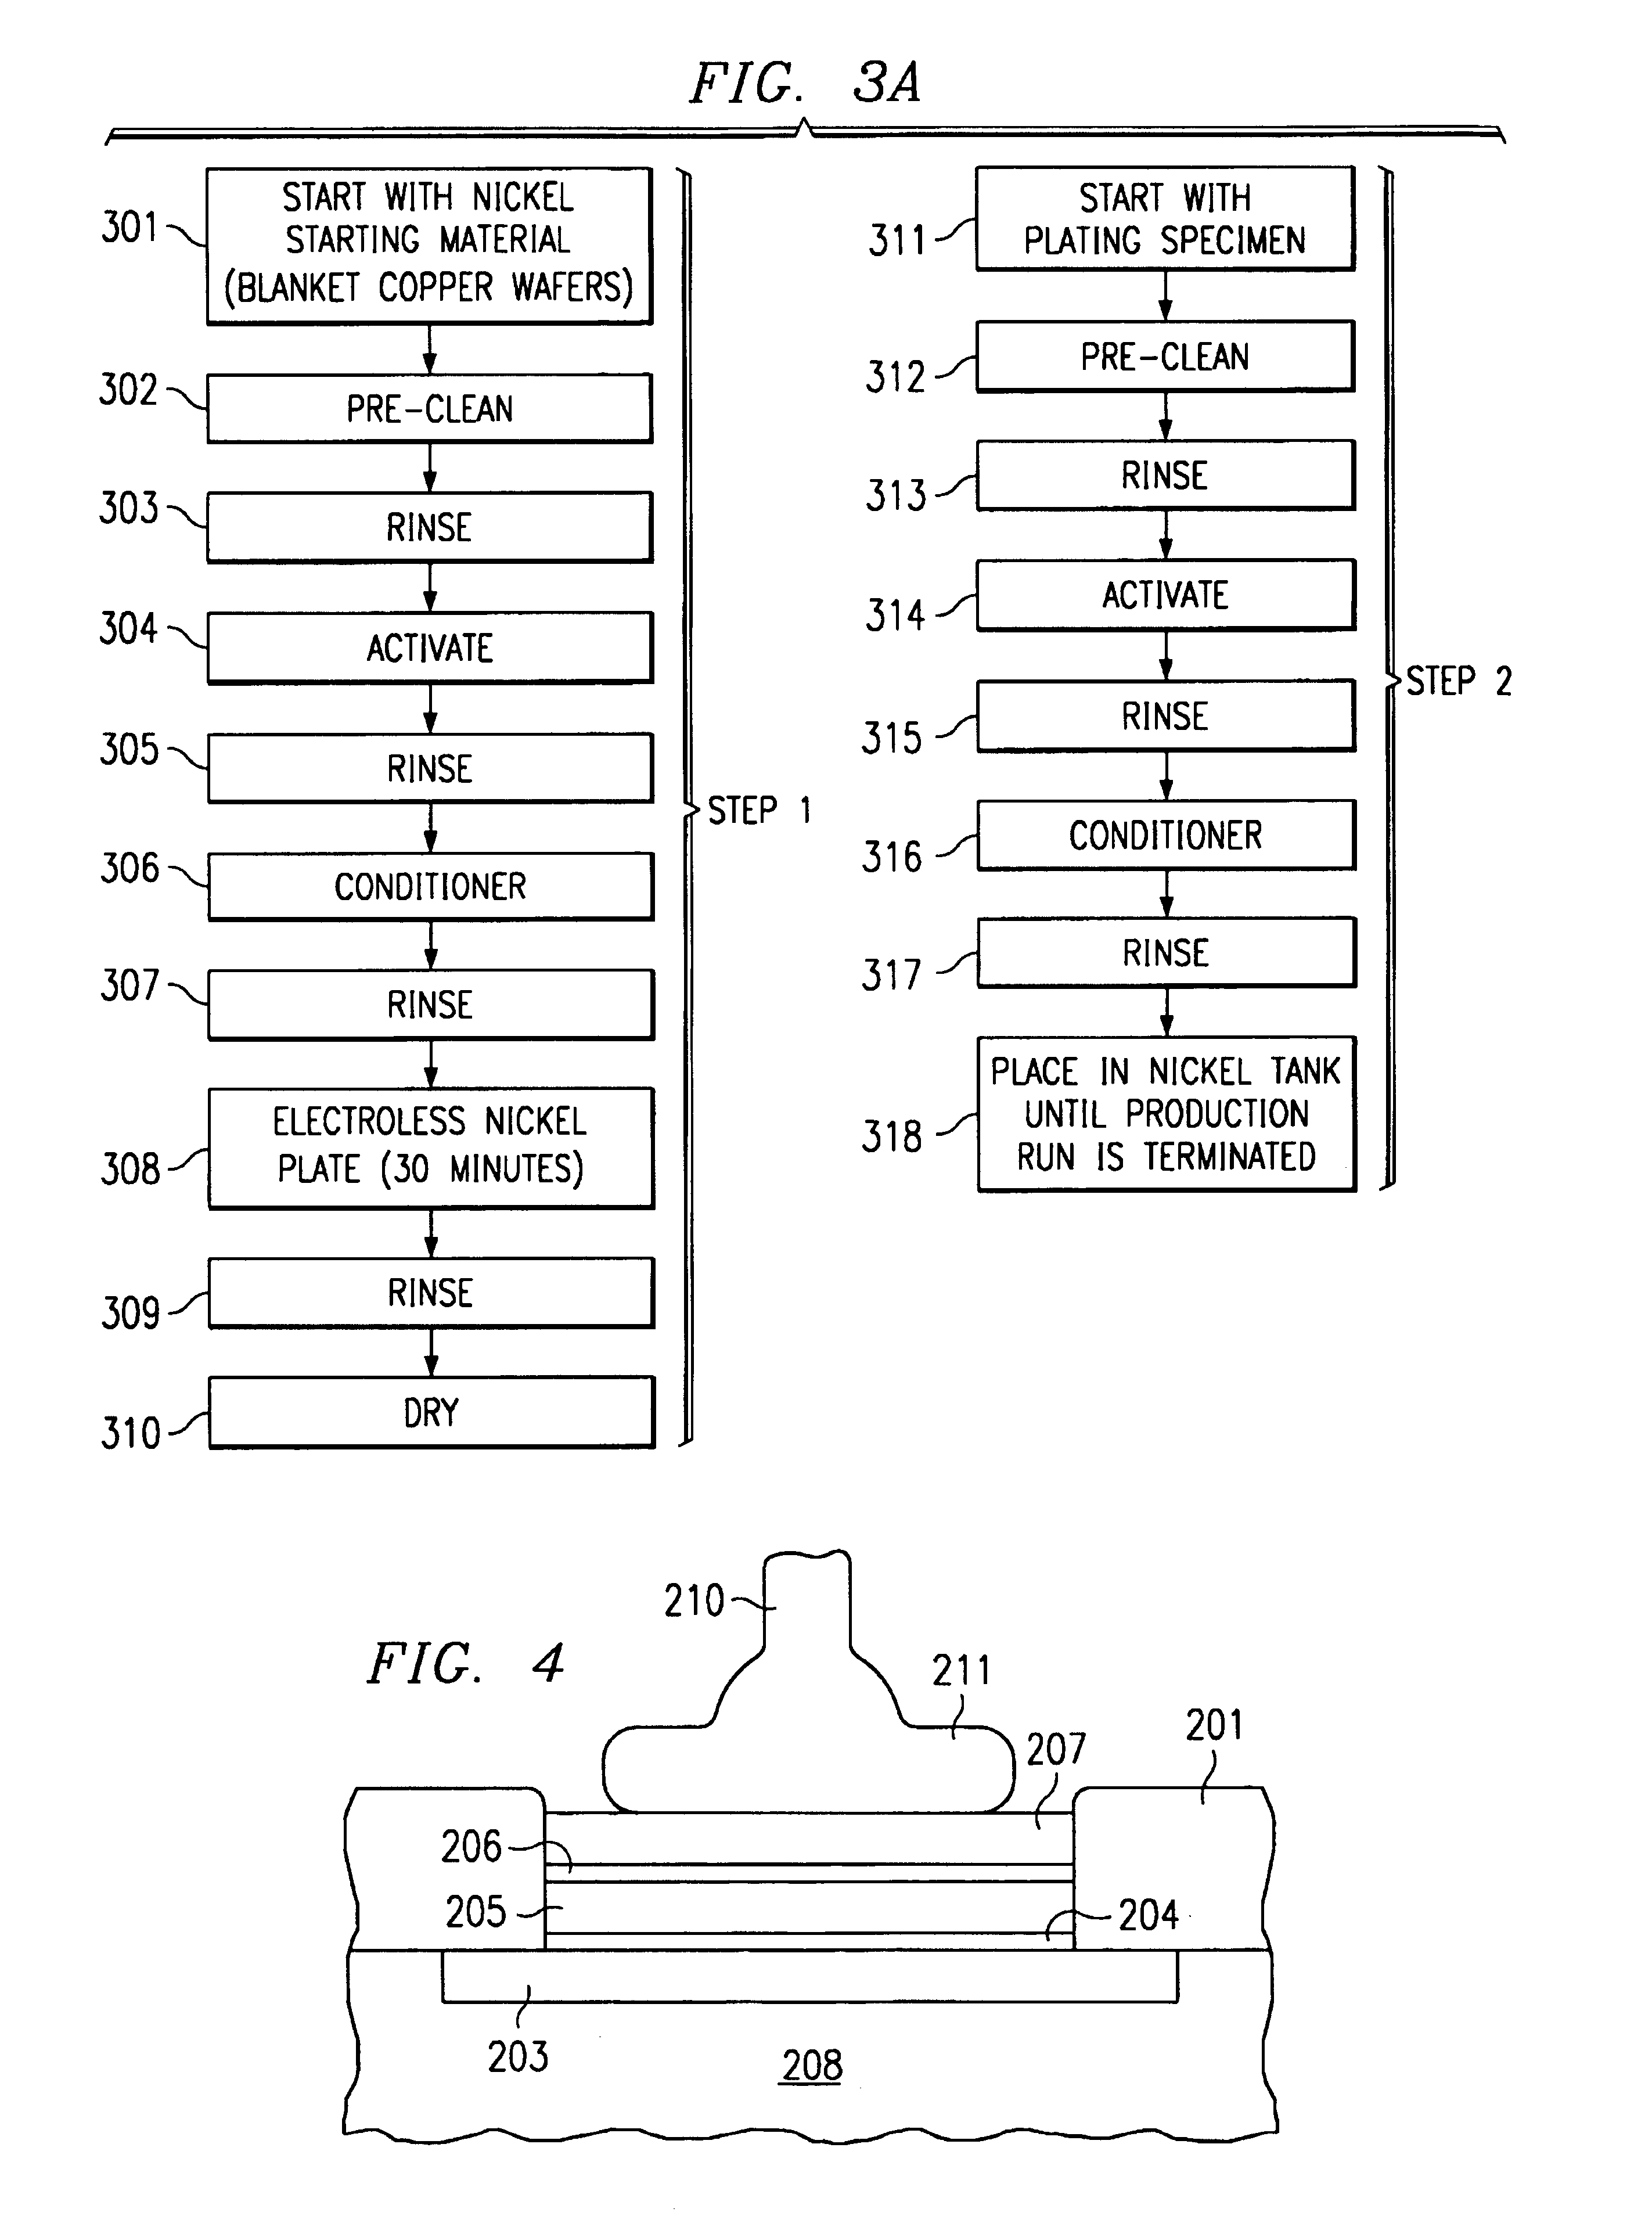 Method to achieve continuous hydrogen saturation in sparingly used electroless nickel plating process